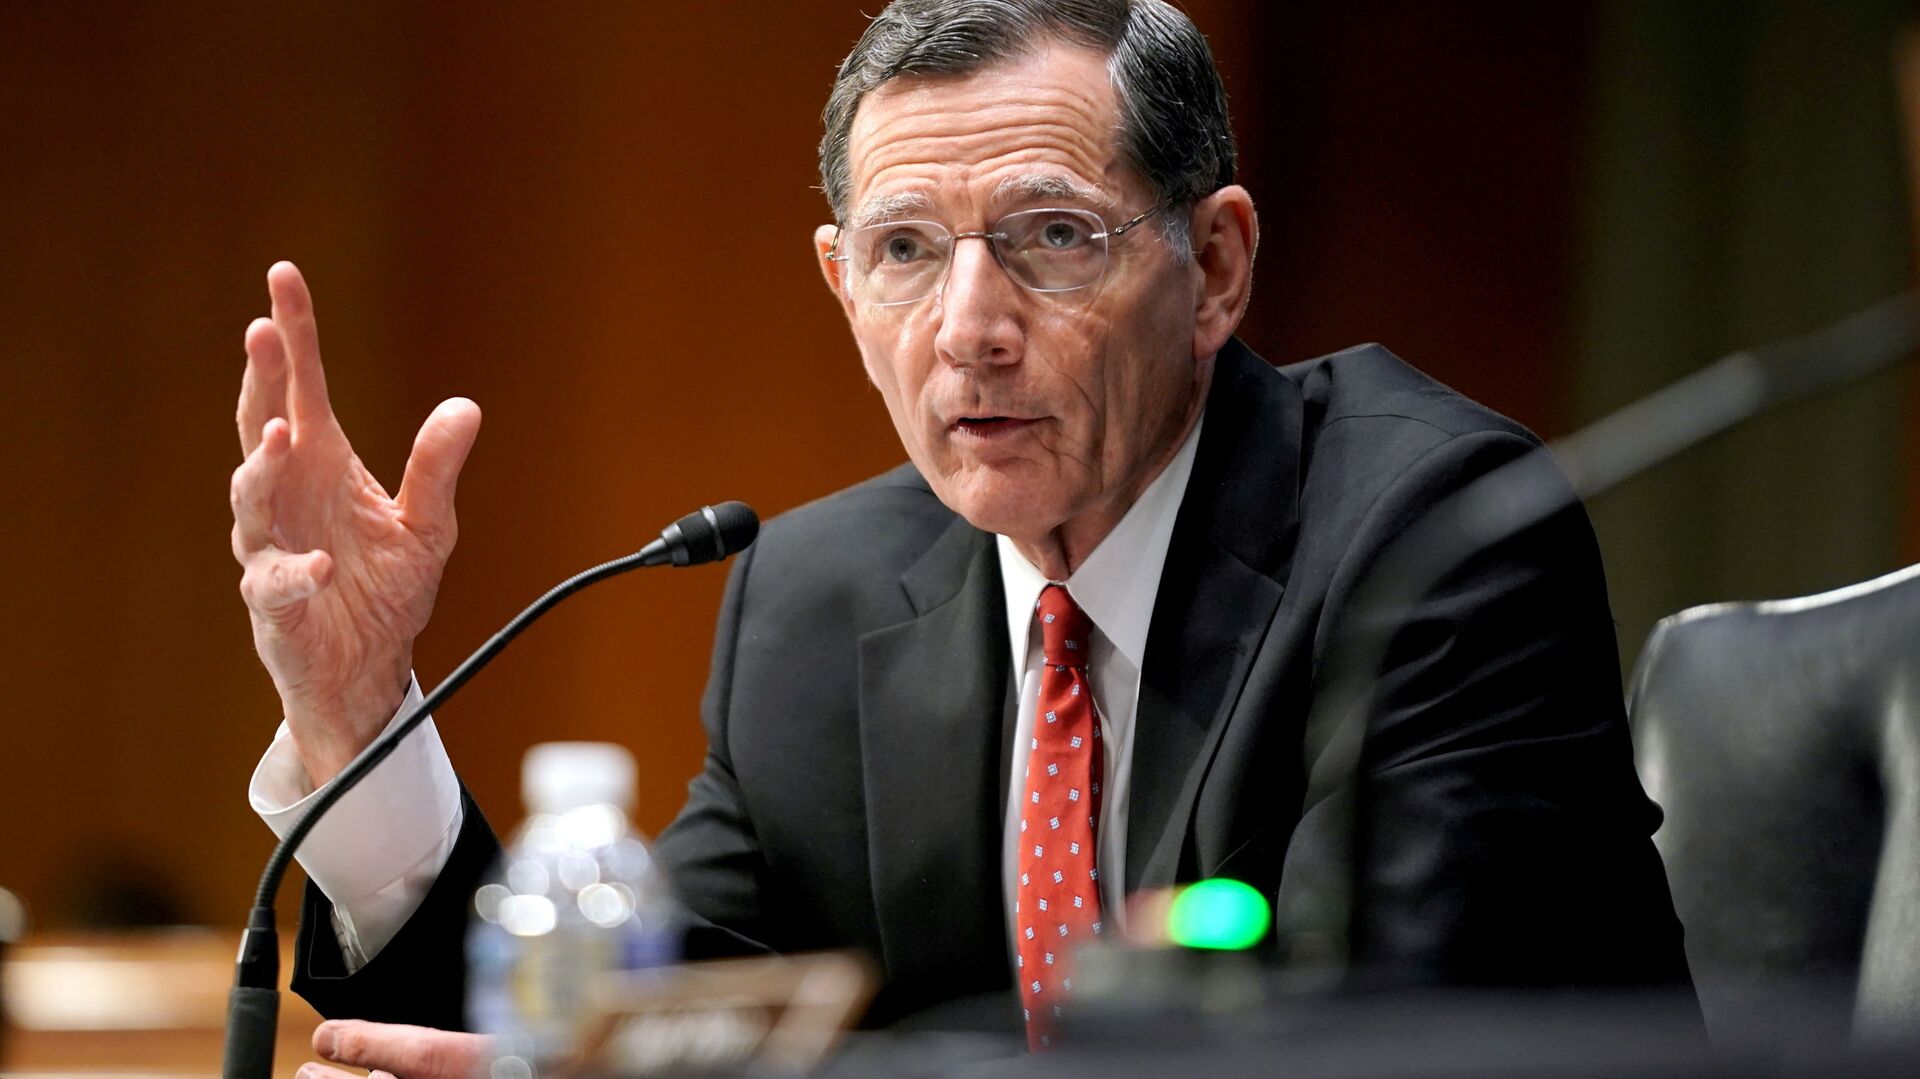 Sen. John Barrasso (R-Wyo.) questions    former U.S. Ambassador to the United Nations Samantha Power, who is President Joe Biden's choice to lead the U.S. Agency for International Development, at a confirmation hearing before the Senate Foreign Relations Committee in Washington, DC, U.S., March 23, 2021.  - Sputnik International, 1920, 04.04.2021